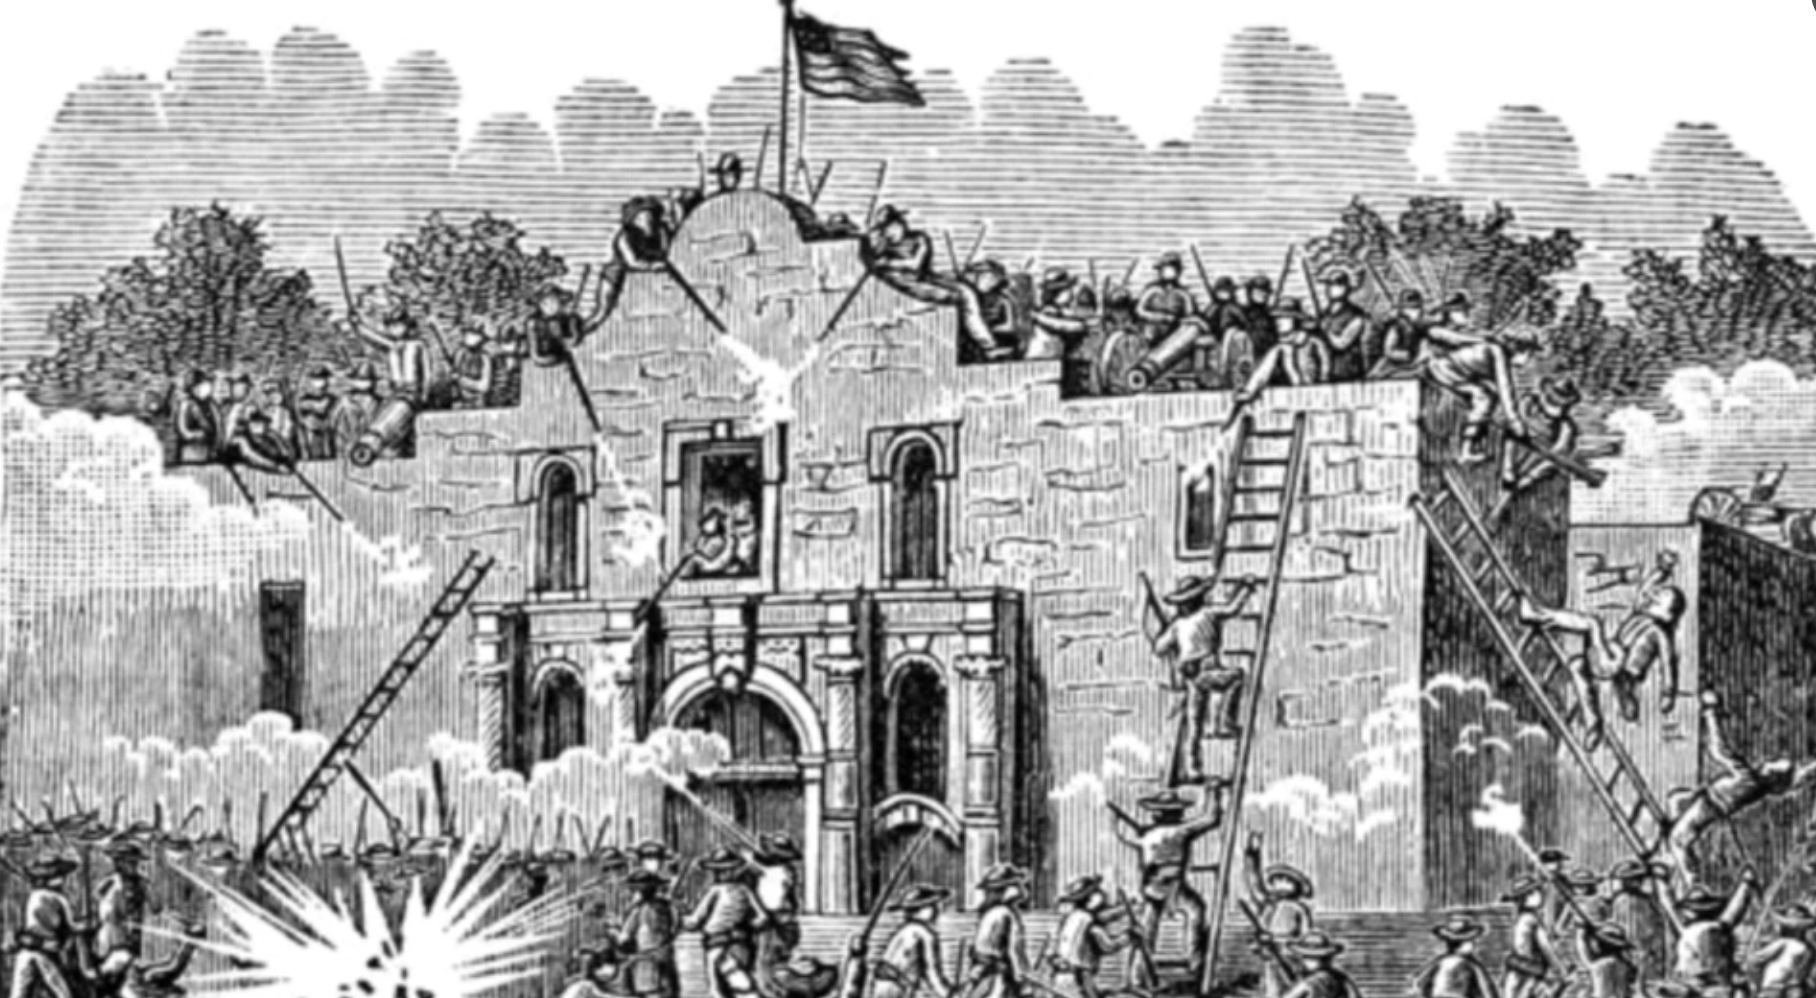 Two Medium Sized Ladies Battle of the Alamo drawing San Antonio Santa Anna Jim Bowie Davy Crocket fight for Texas independence